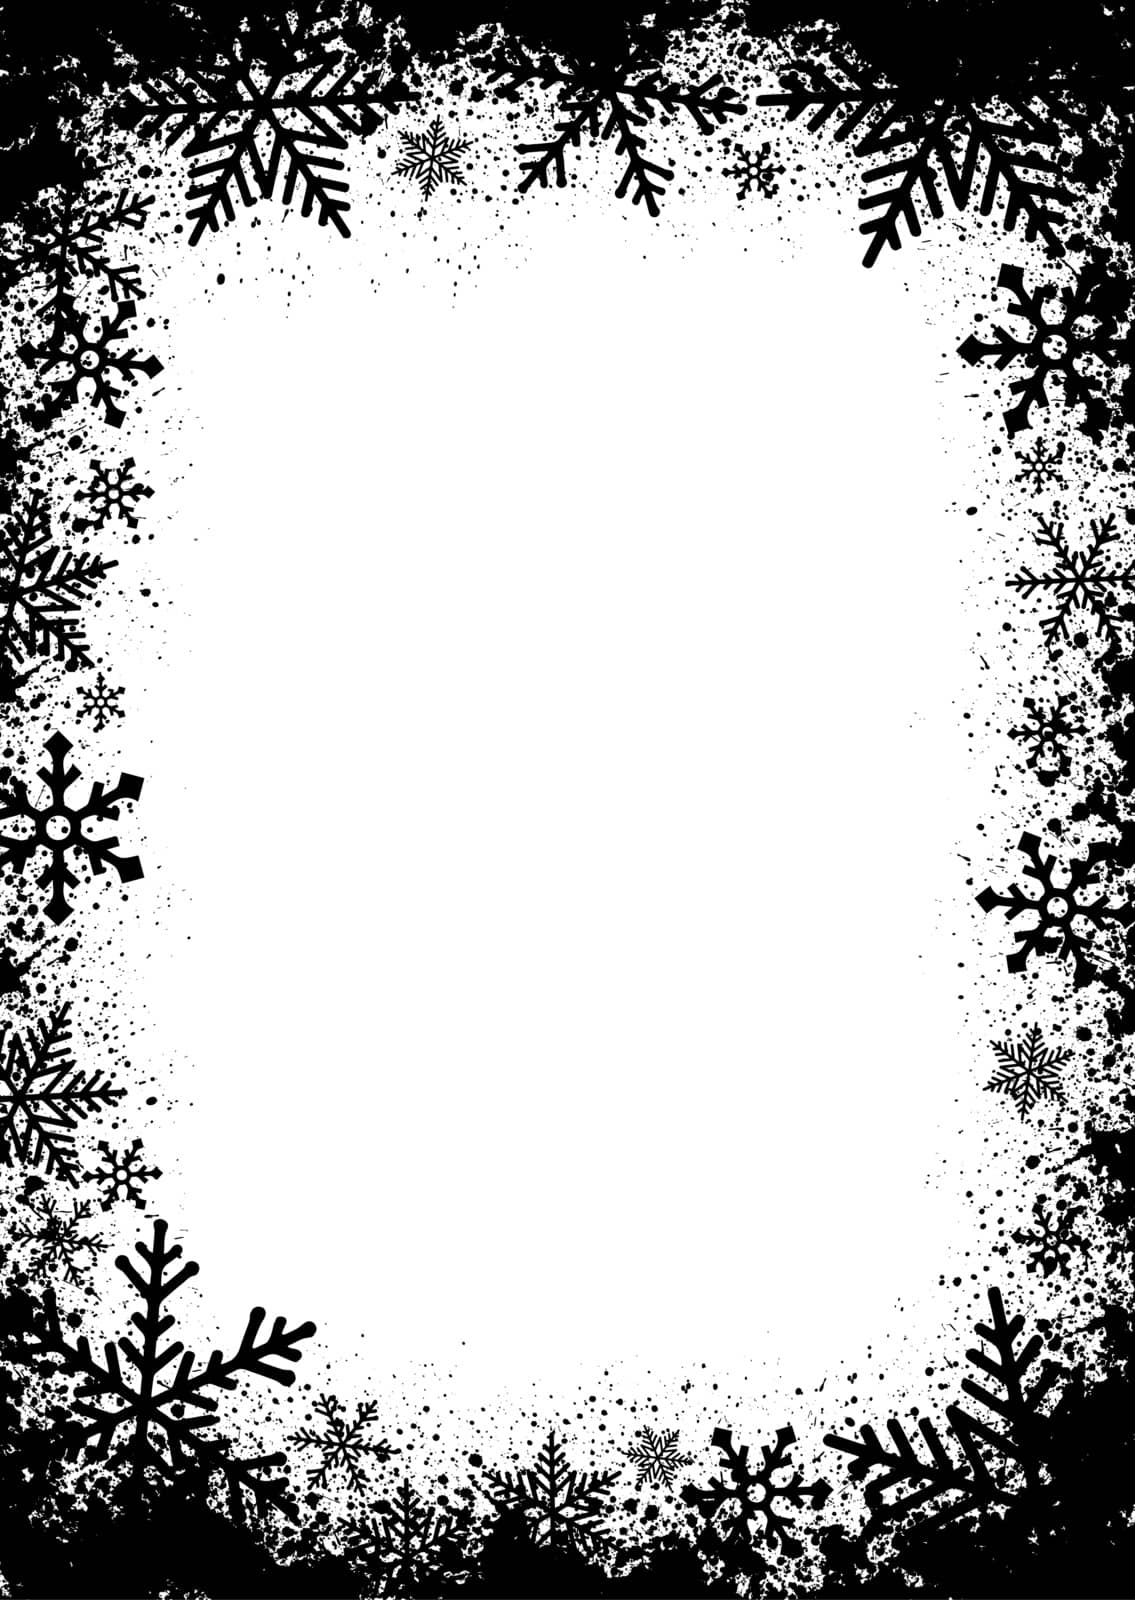 winter image background frame ( snow crystal) by barks